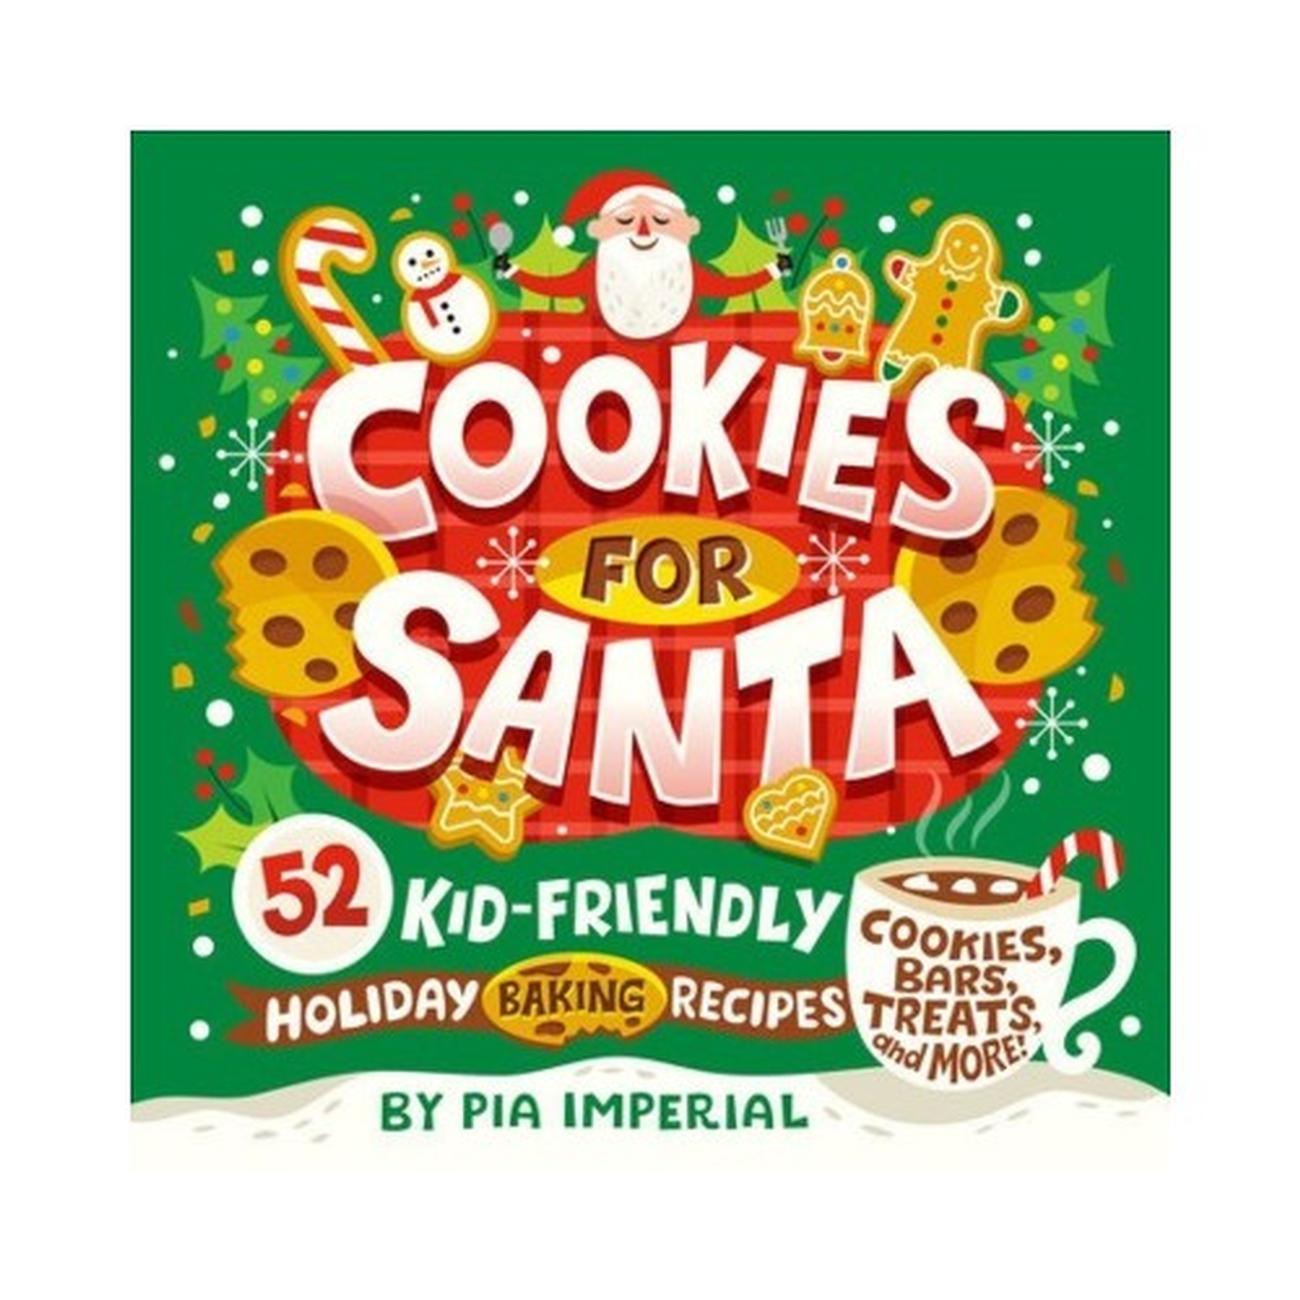 cookies-for-santa-by-pia-imperial - Cookies For Santa by Pia Imperial 